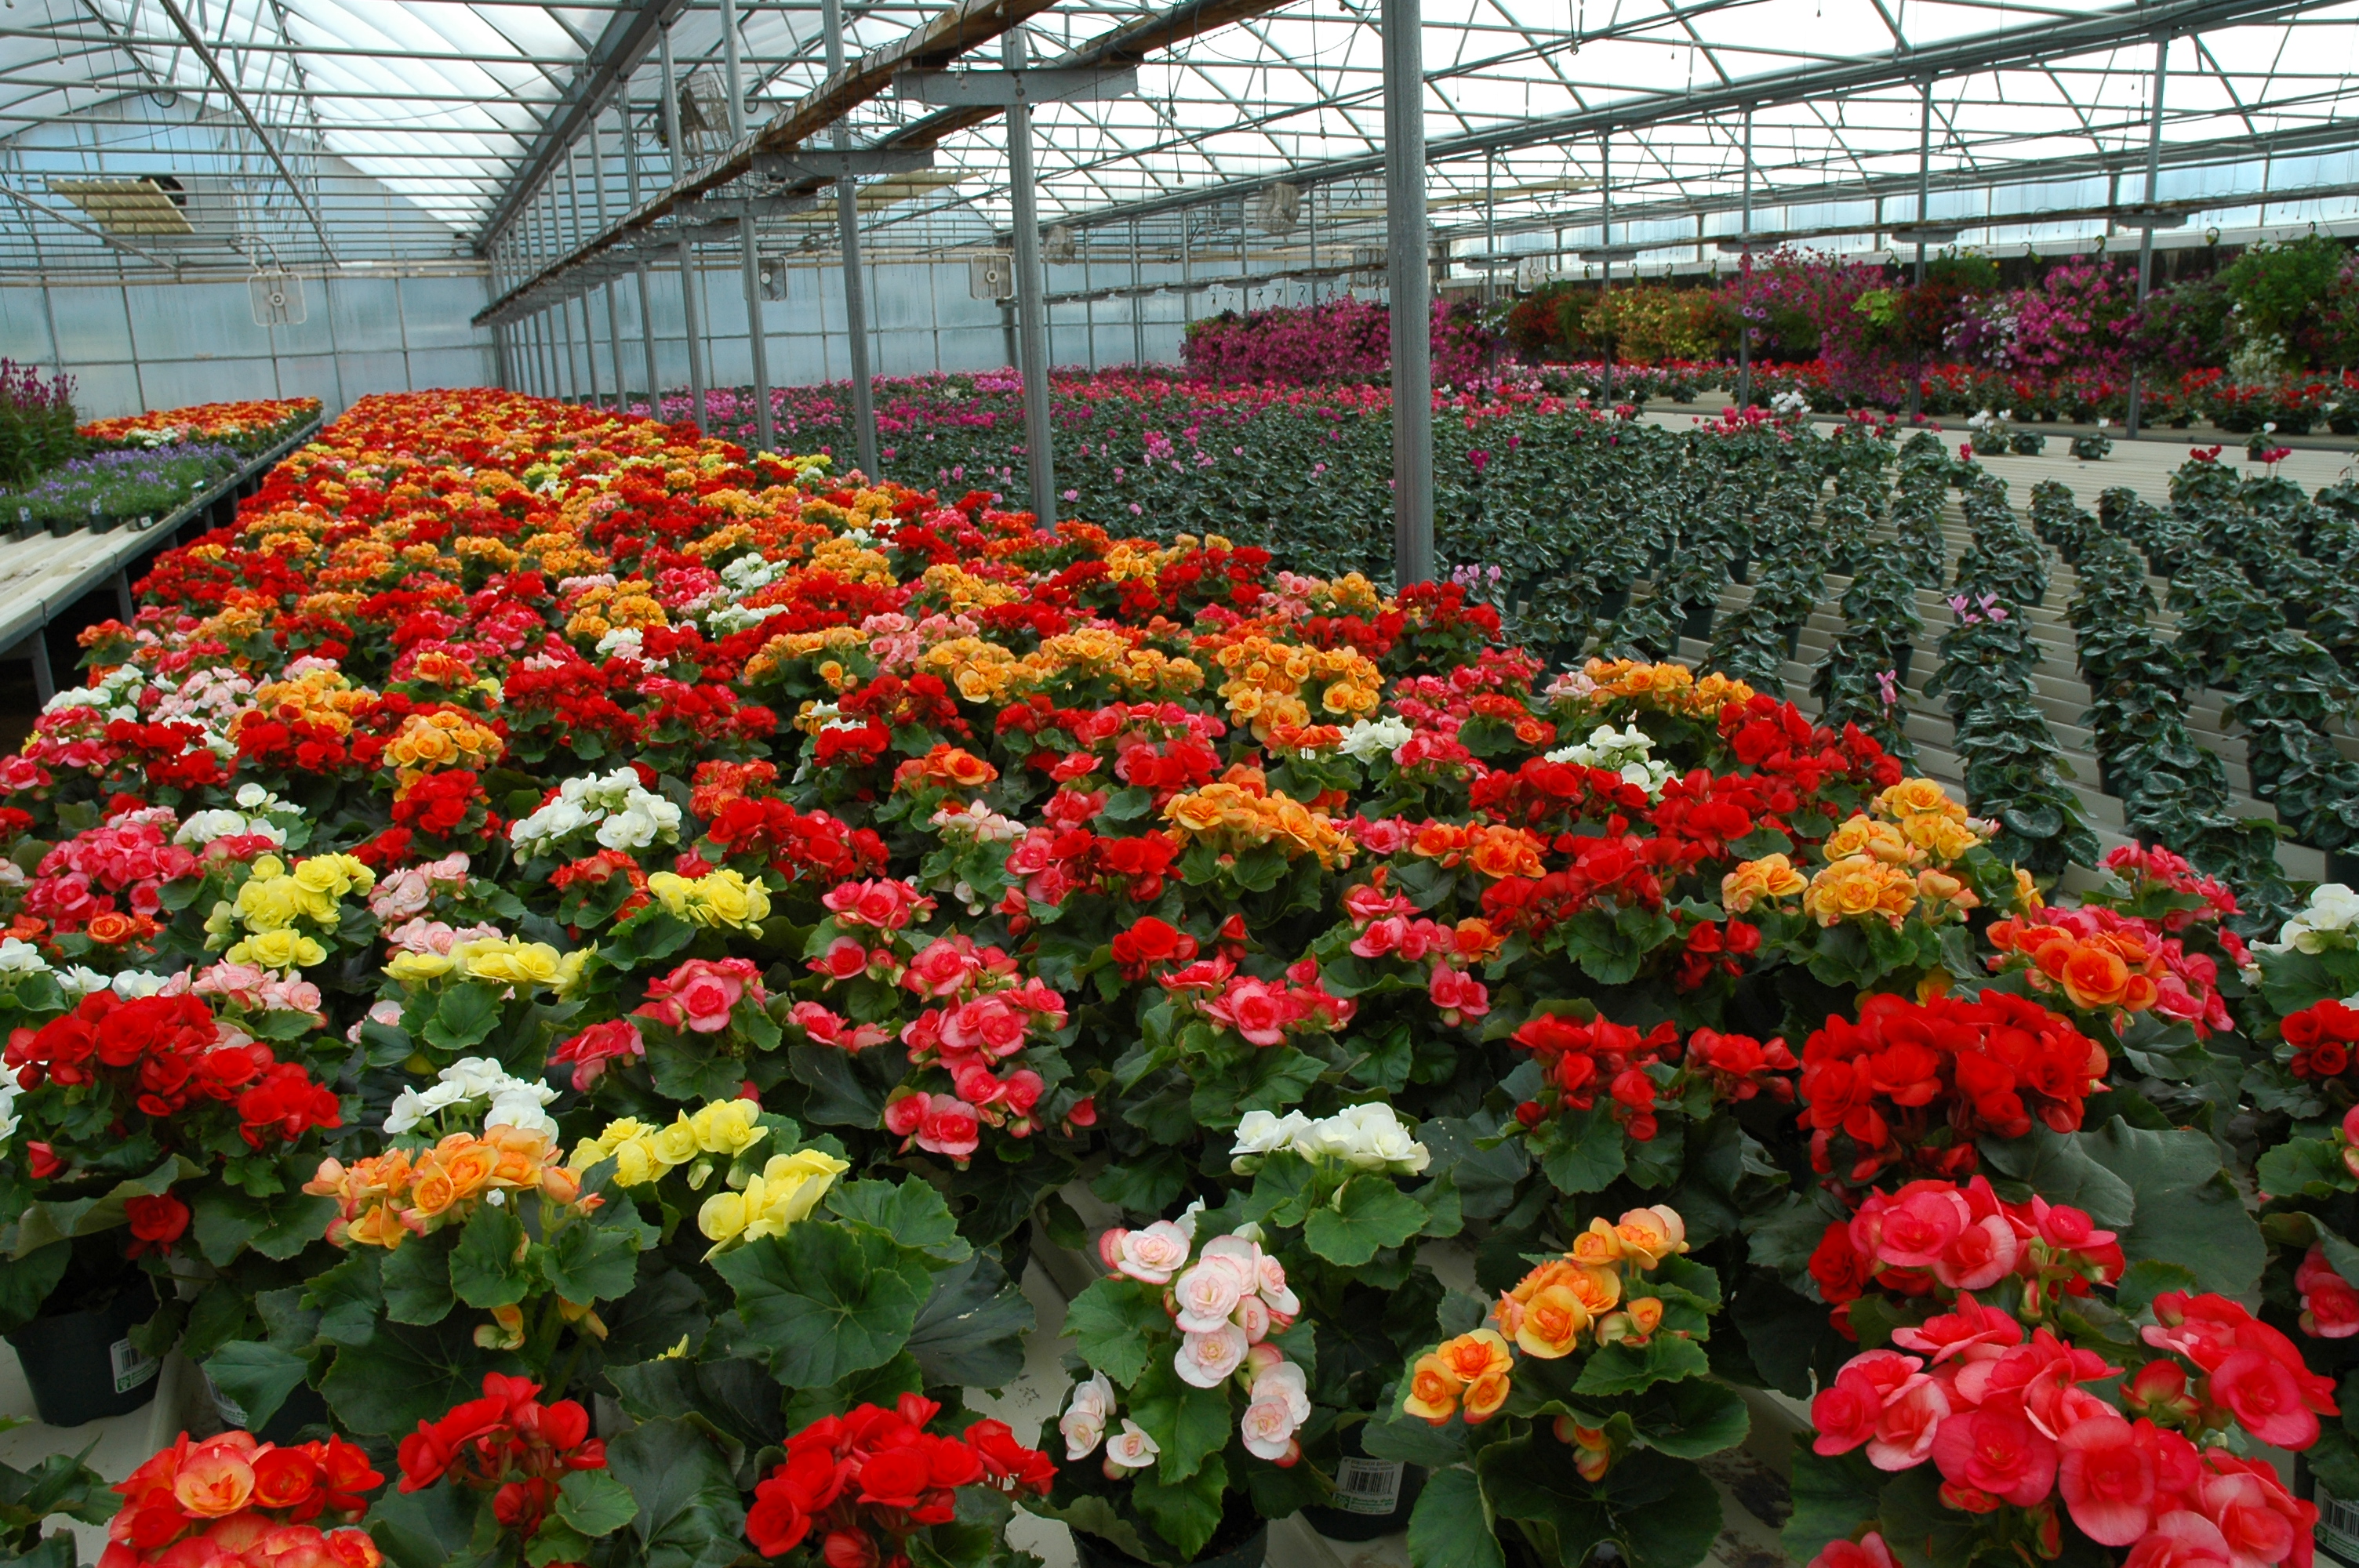 red, orange, yellow, white, and pink begonias inside a greenhouse